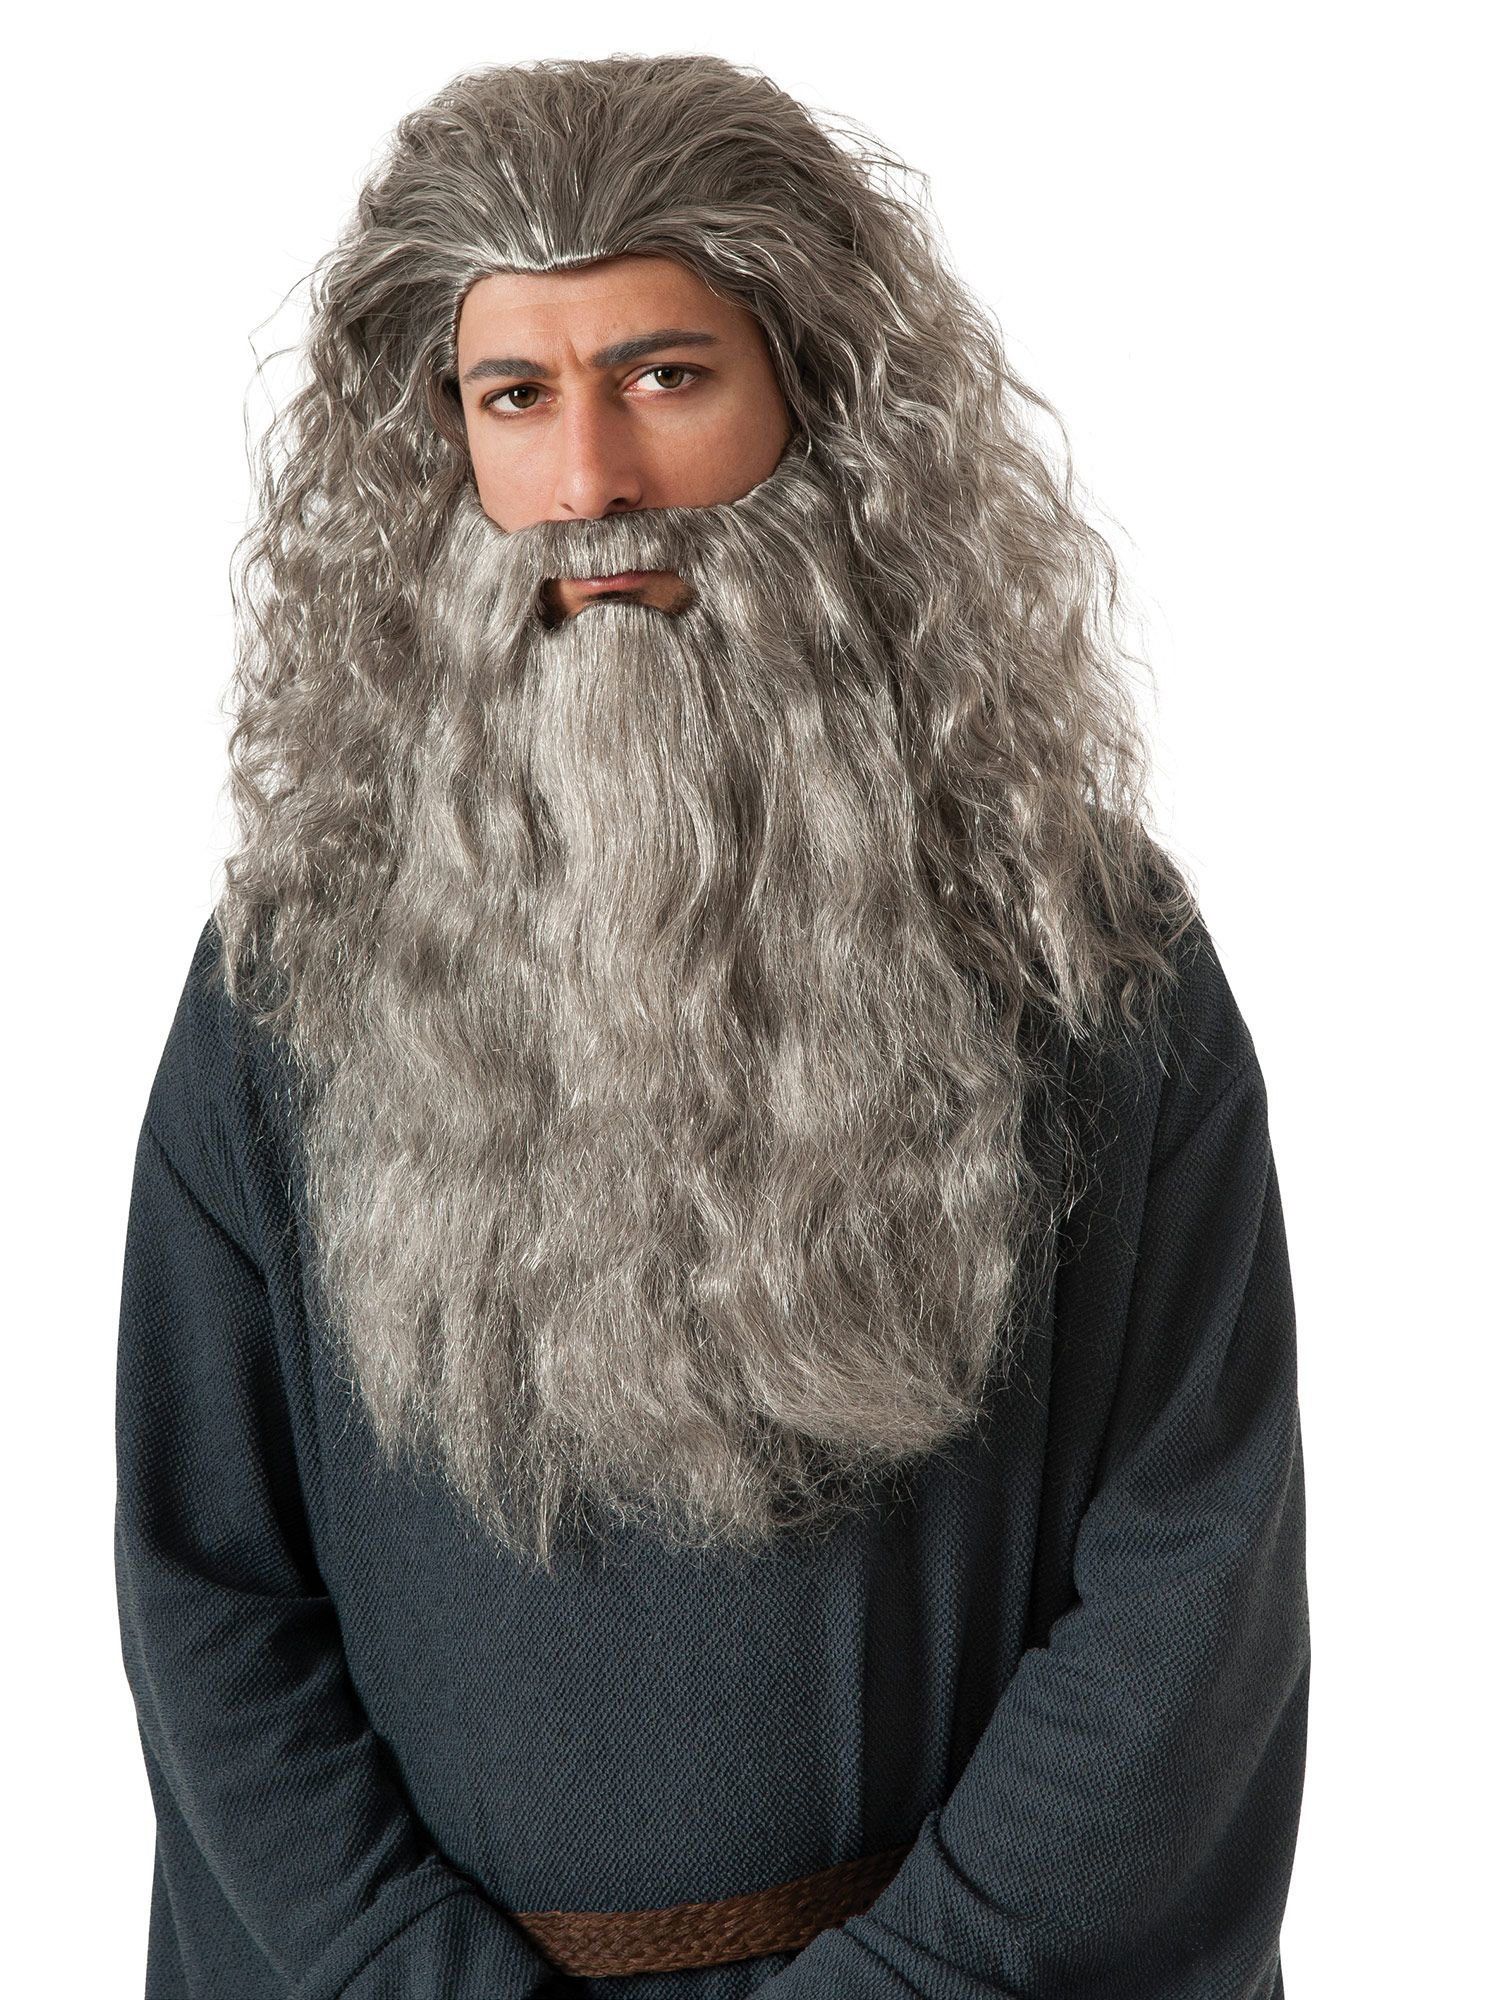 Adult The Lord of the Rings Gandalf Beard